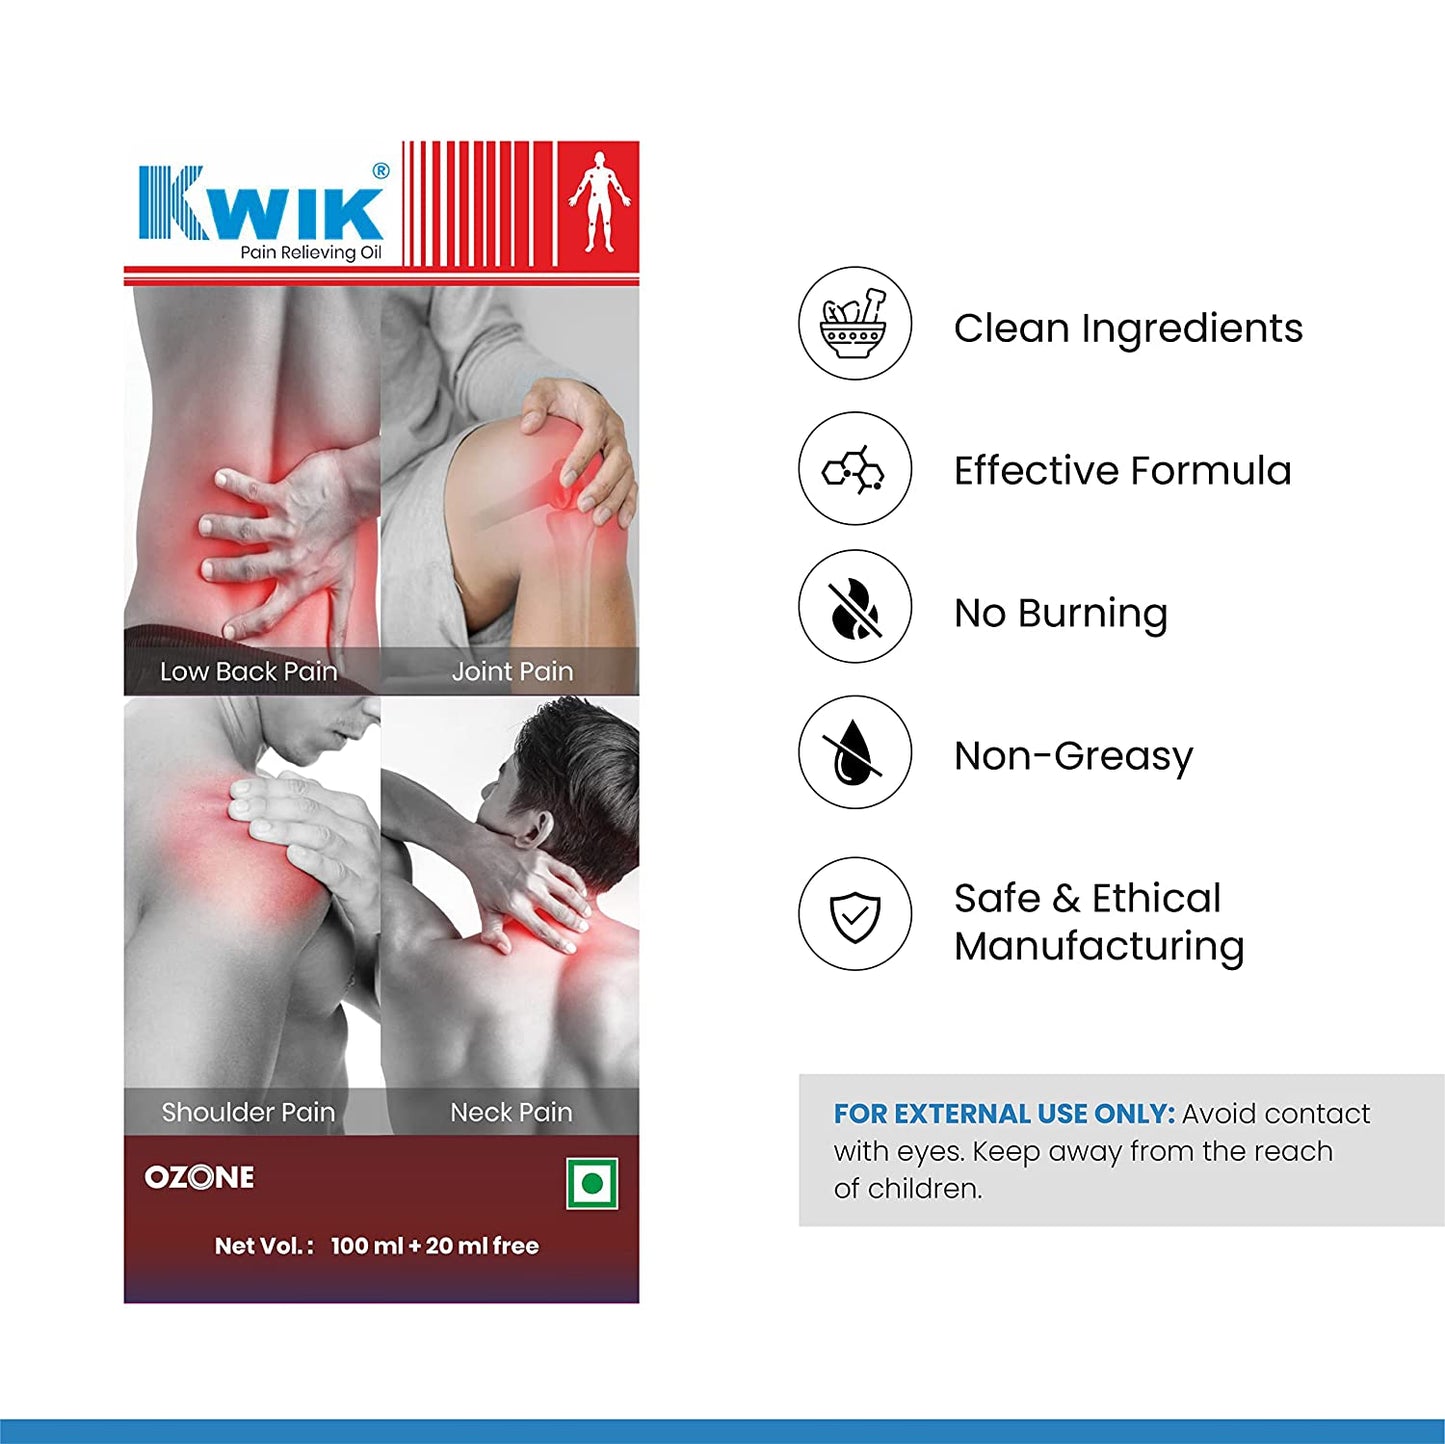 Highlighted Benefits of Kwik Pain Relief Oil